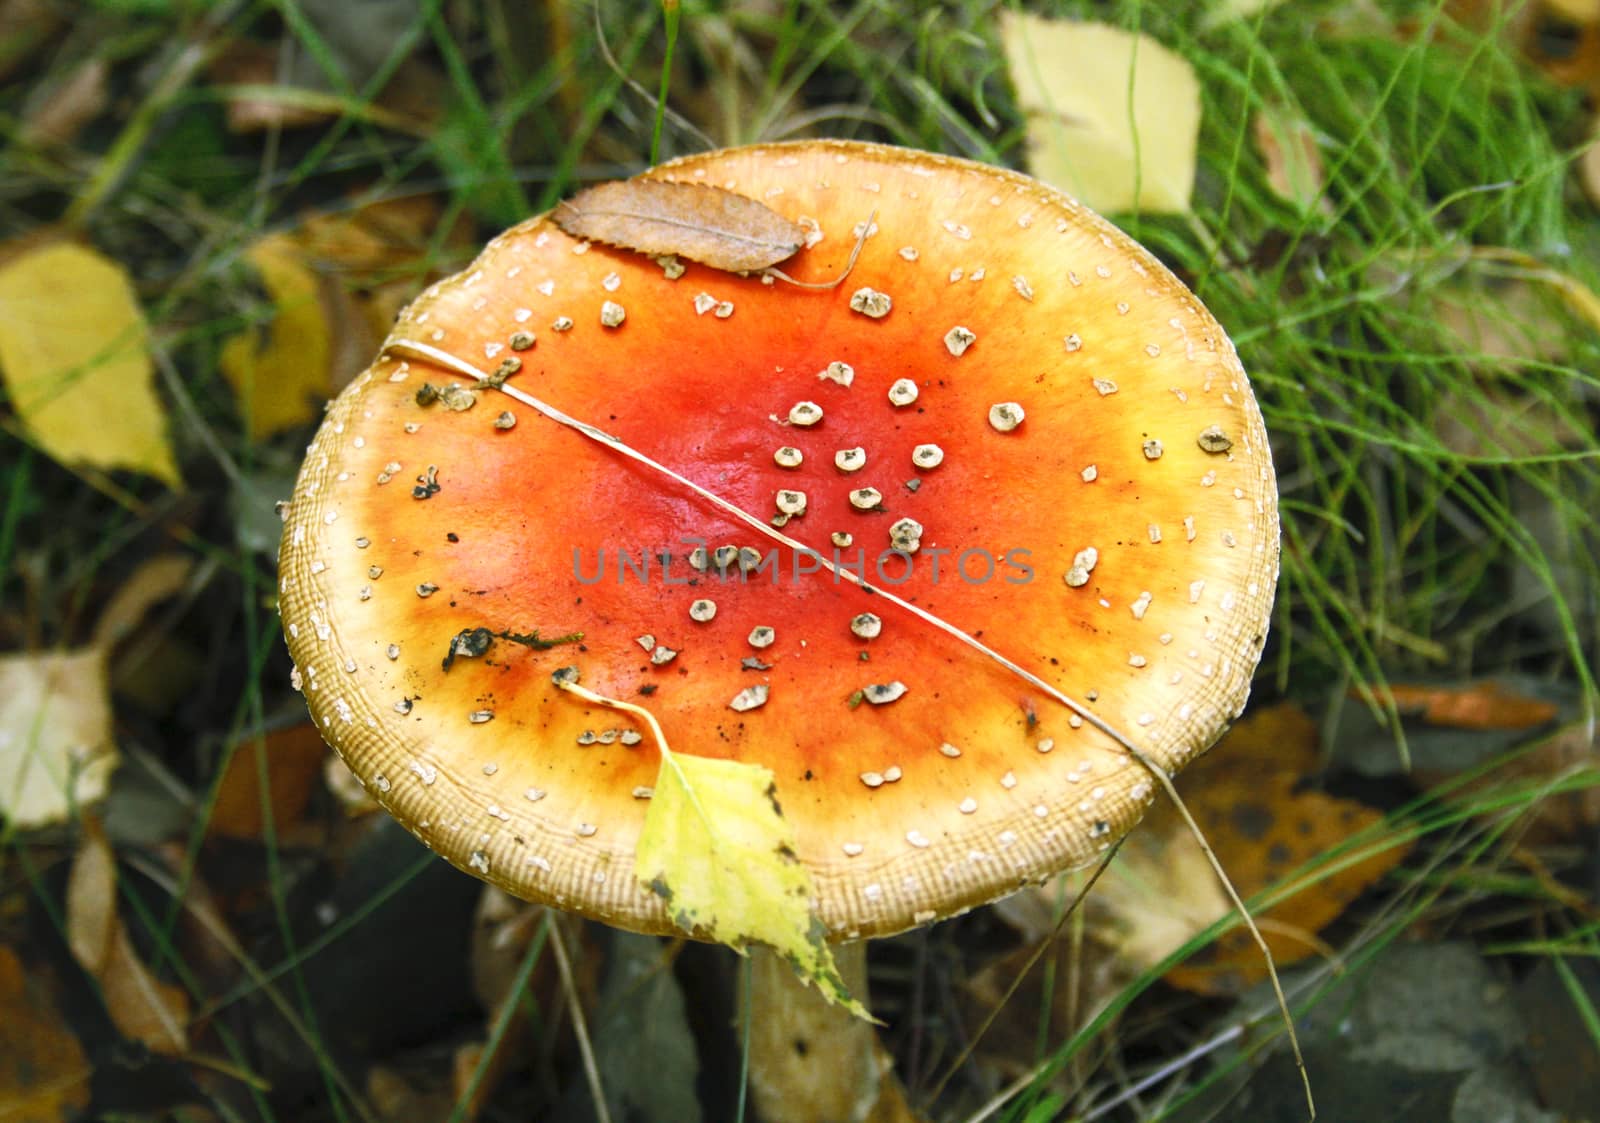 Autumn mushroom in the forest clearing